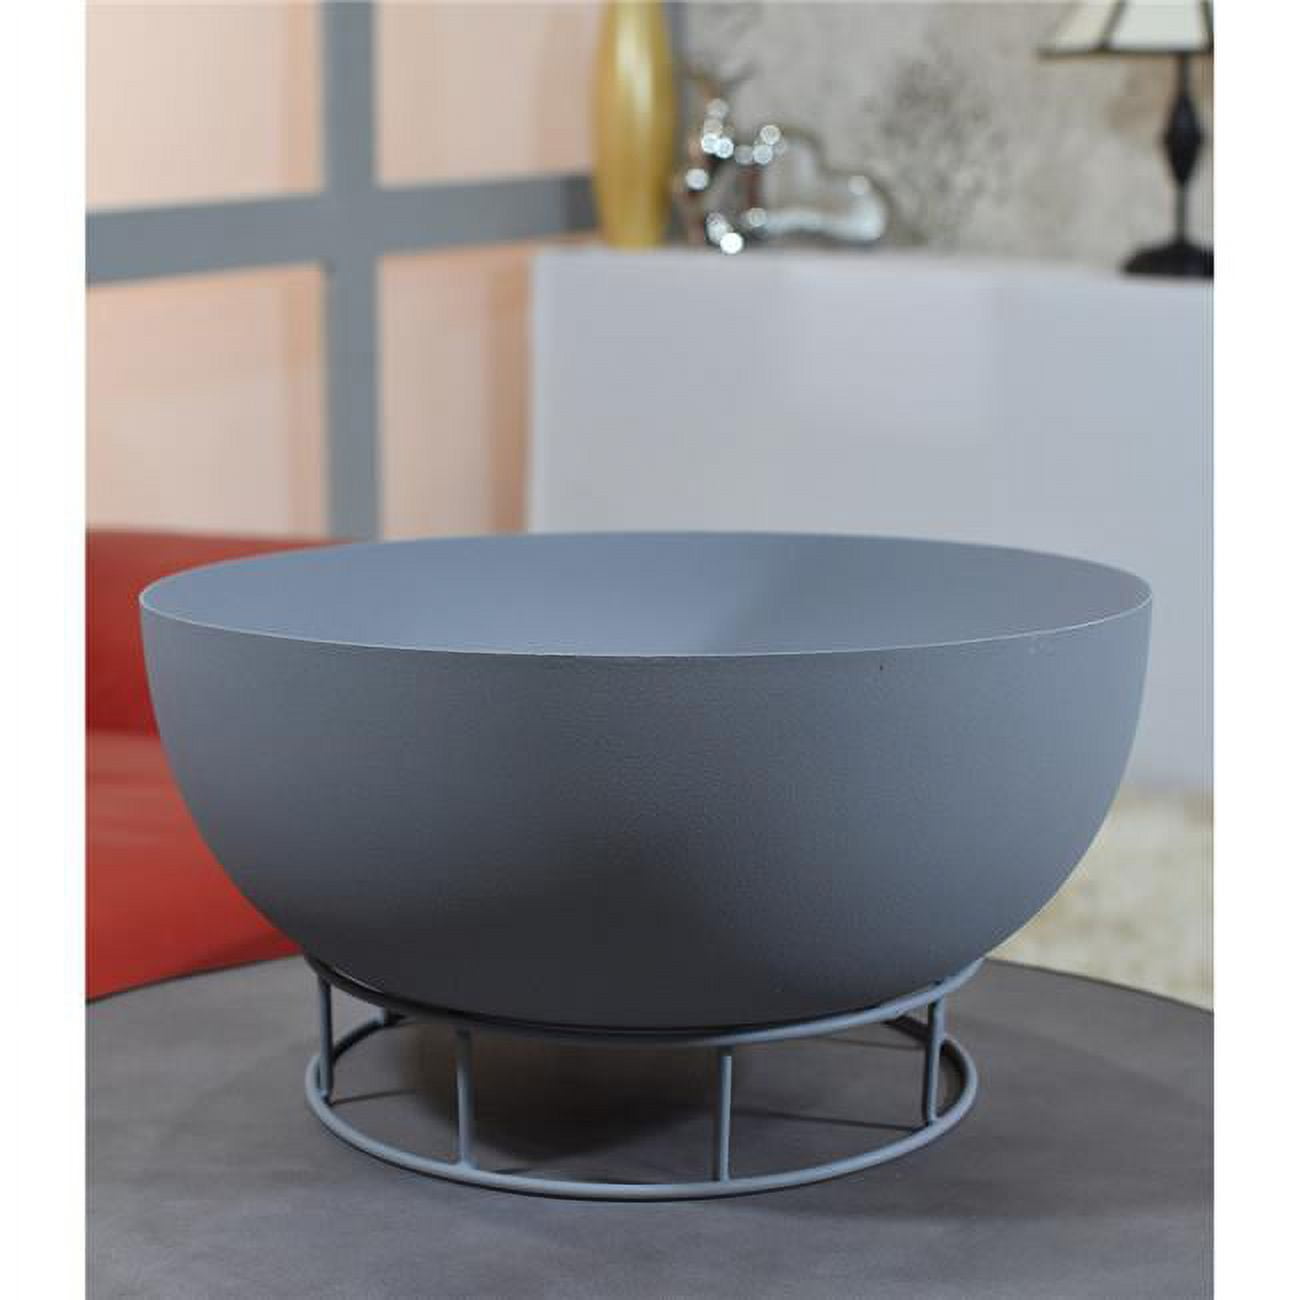 Picture of BBH Homes UBBBAOB287ASC1HS 30 x 30 x 16.5 cm Handmade Decorative Bowls with Iron Stand, Light Gray